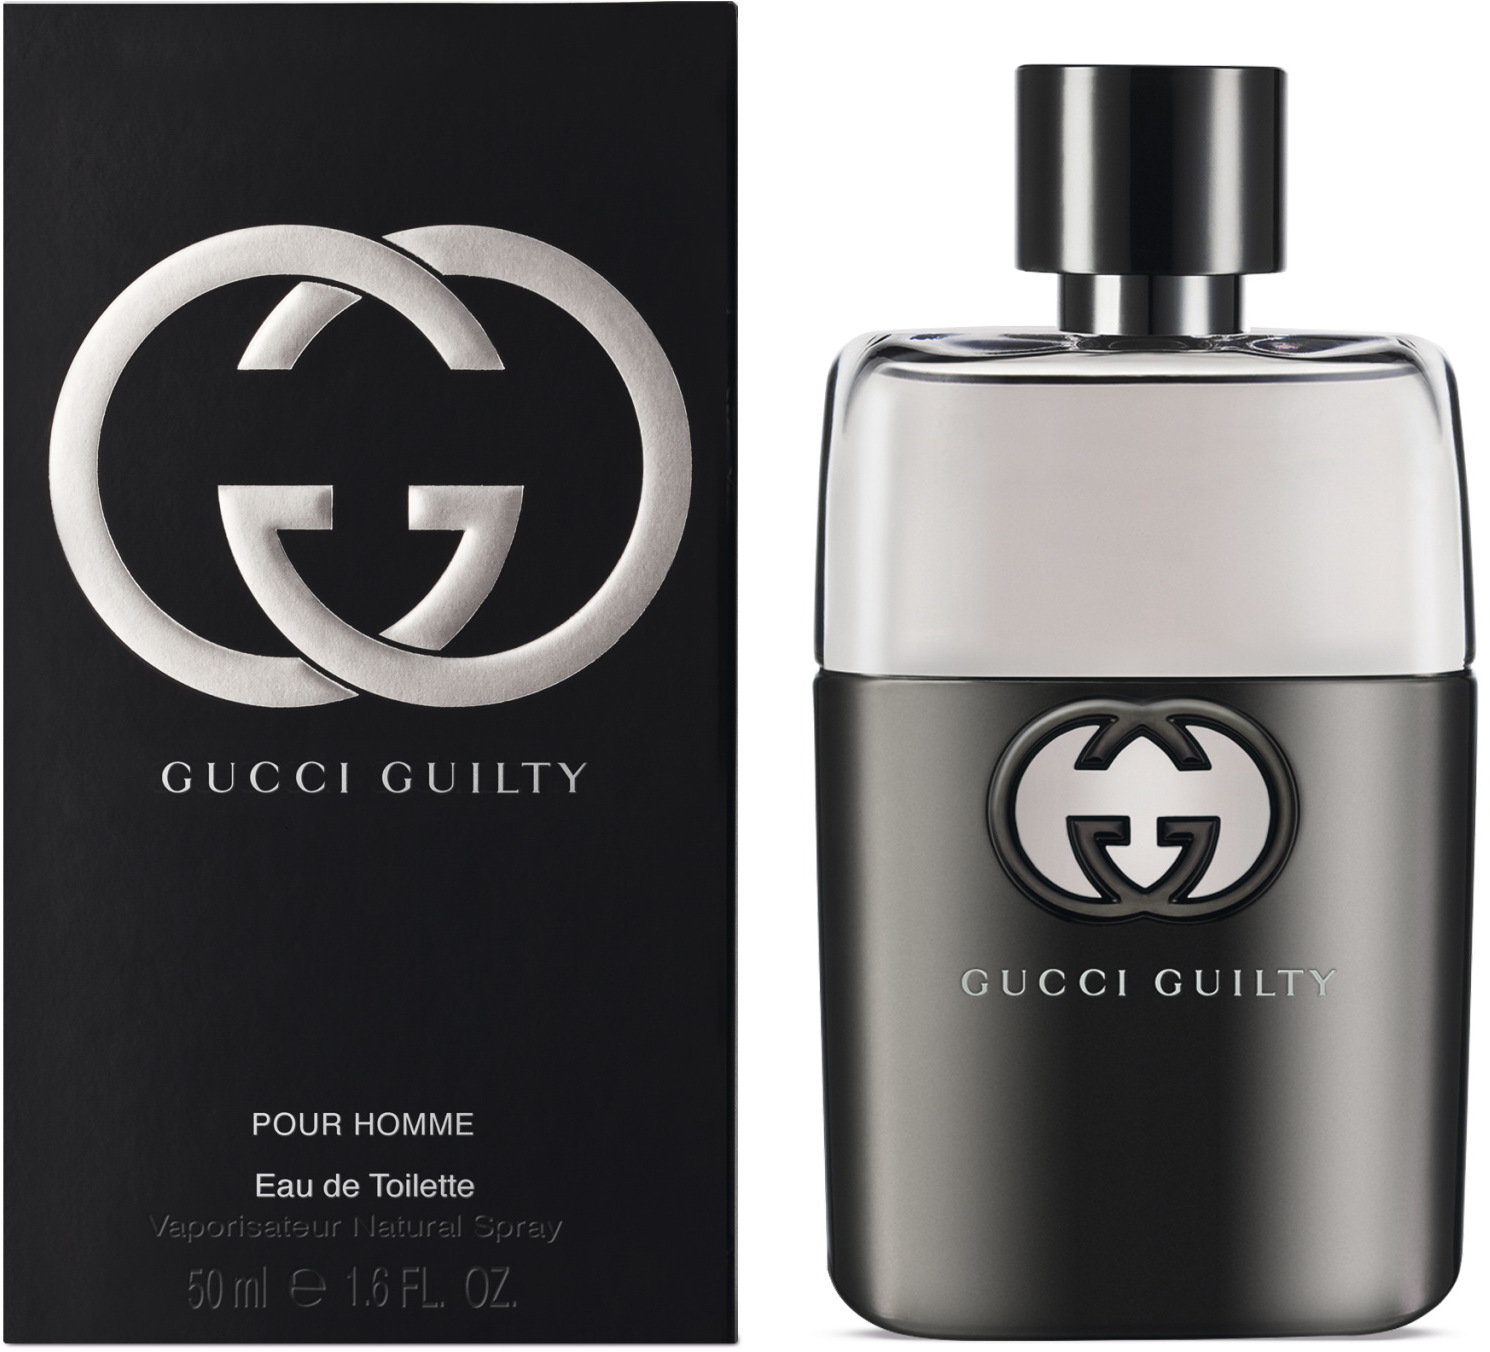 Gucci Guilty Pour Homme EdT 50ml in 